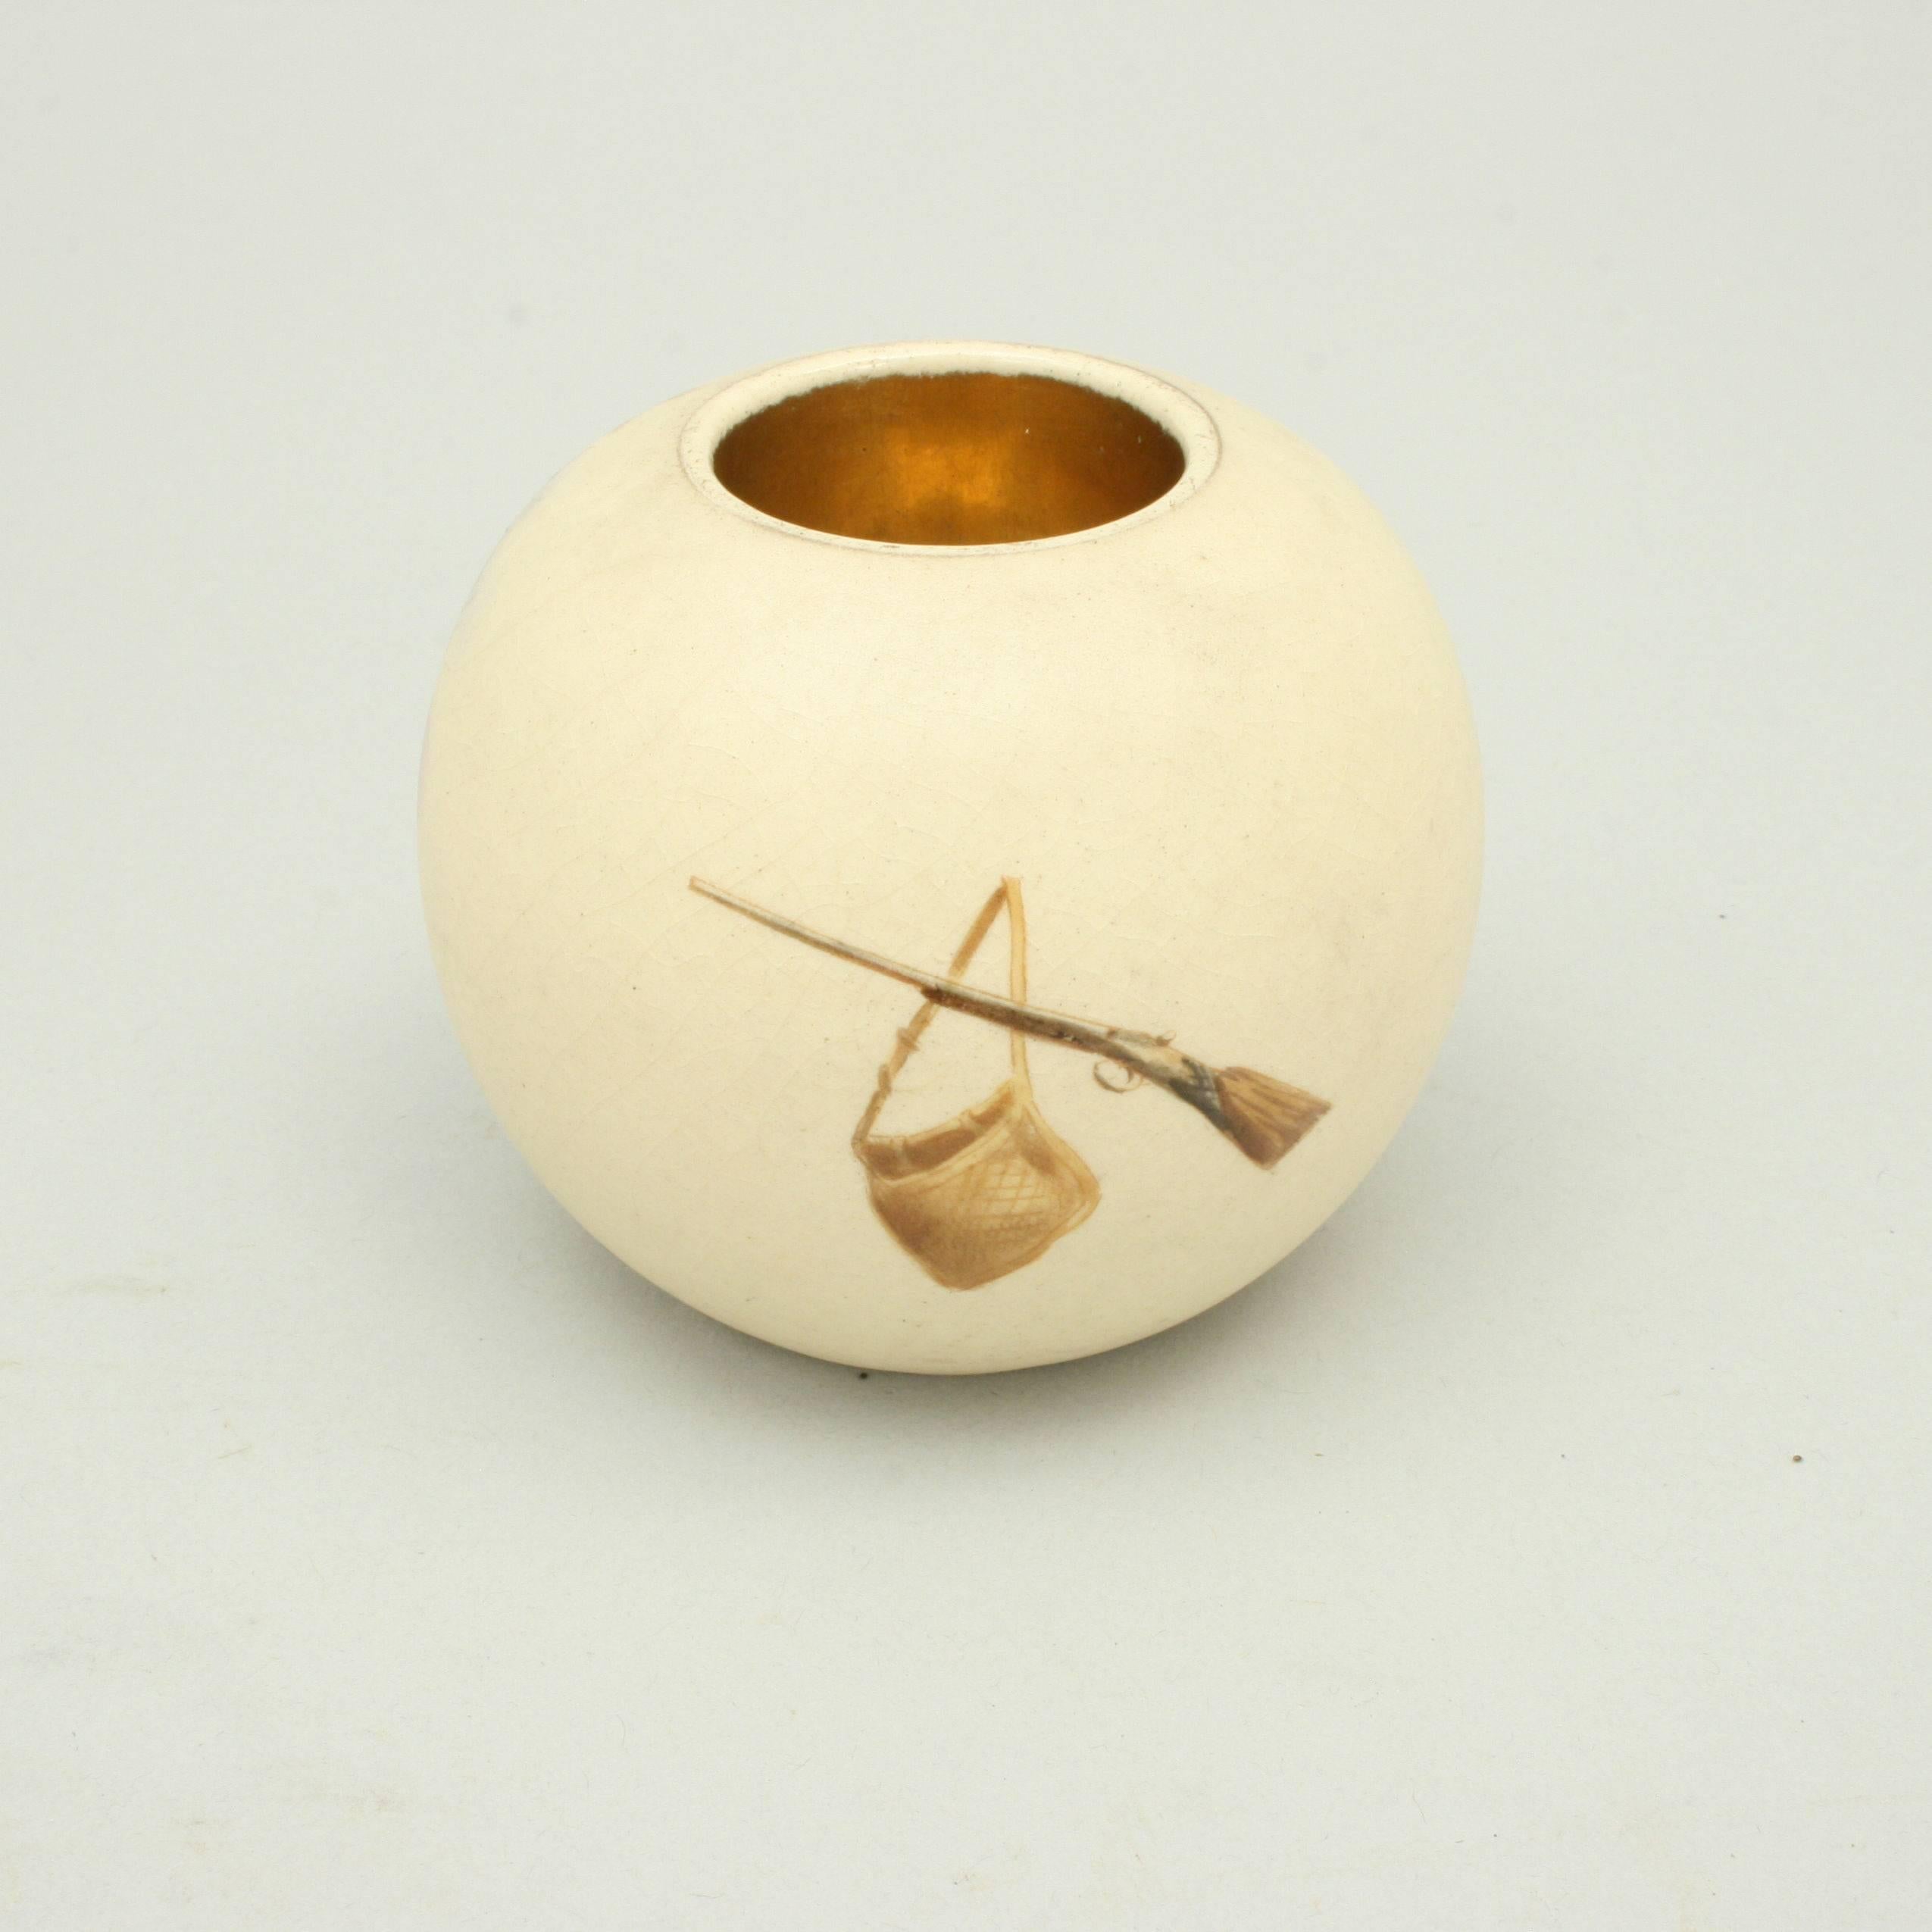 Late 19th Century Ceramic Hunting Match Holder, Taylor Tunnicliff